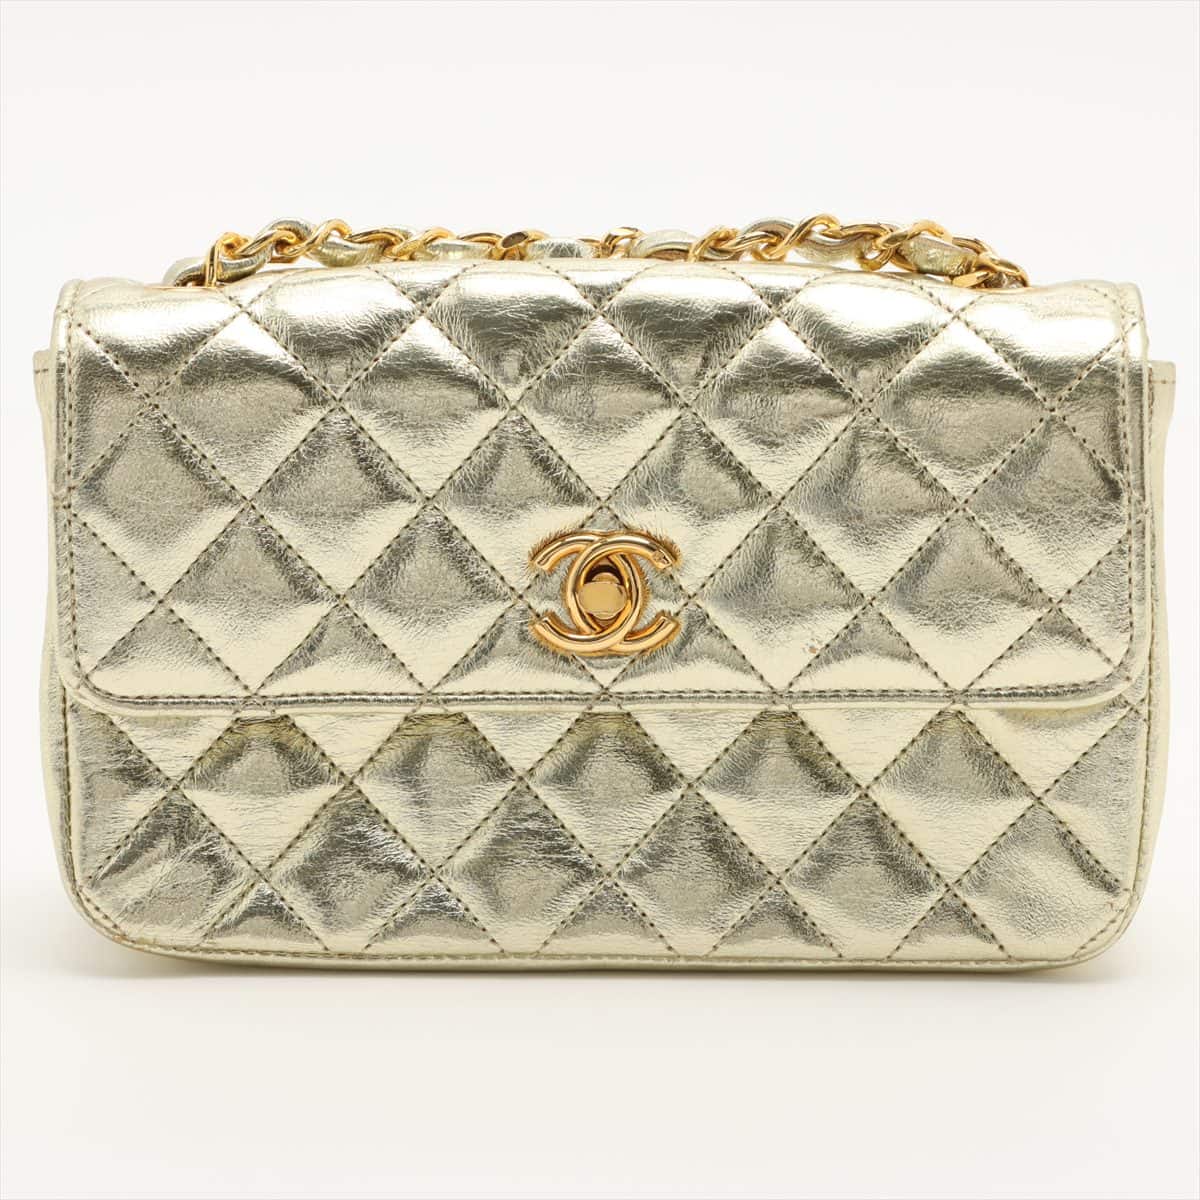 Chanel Mini Matelasse Leather Single flap Double chain bag Gold Gold Metal fittings No serial number